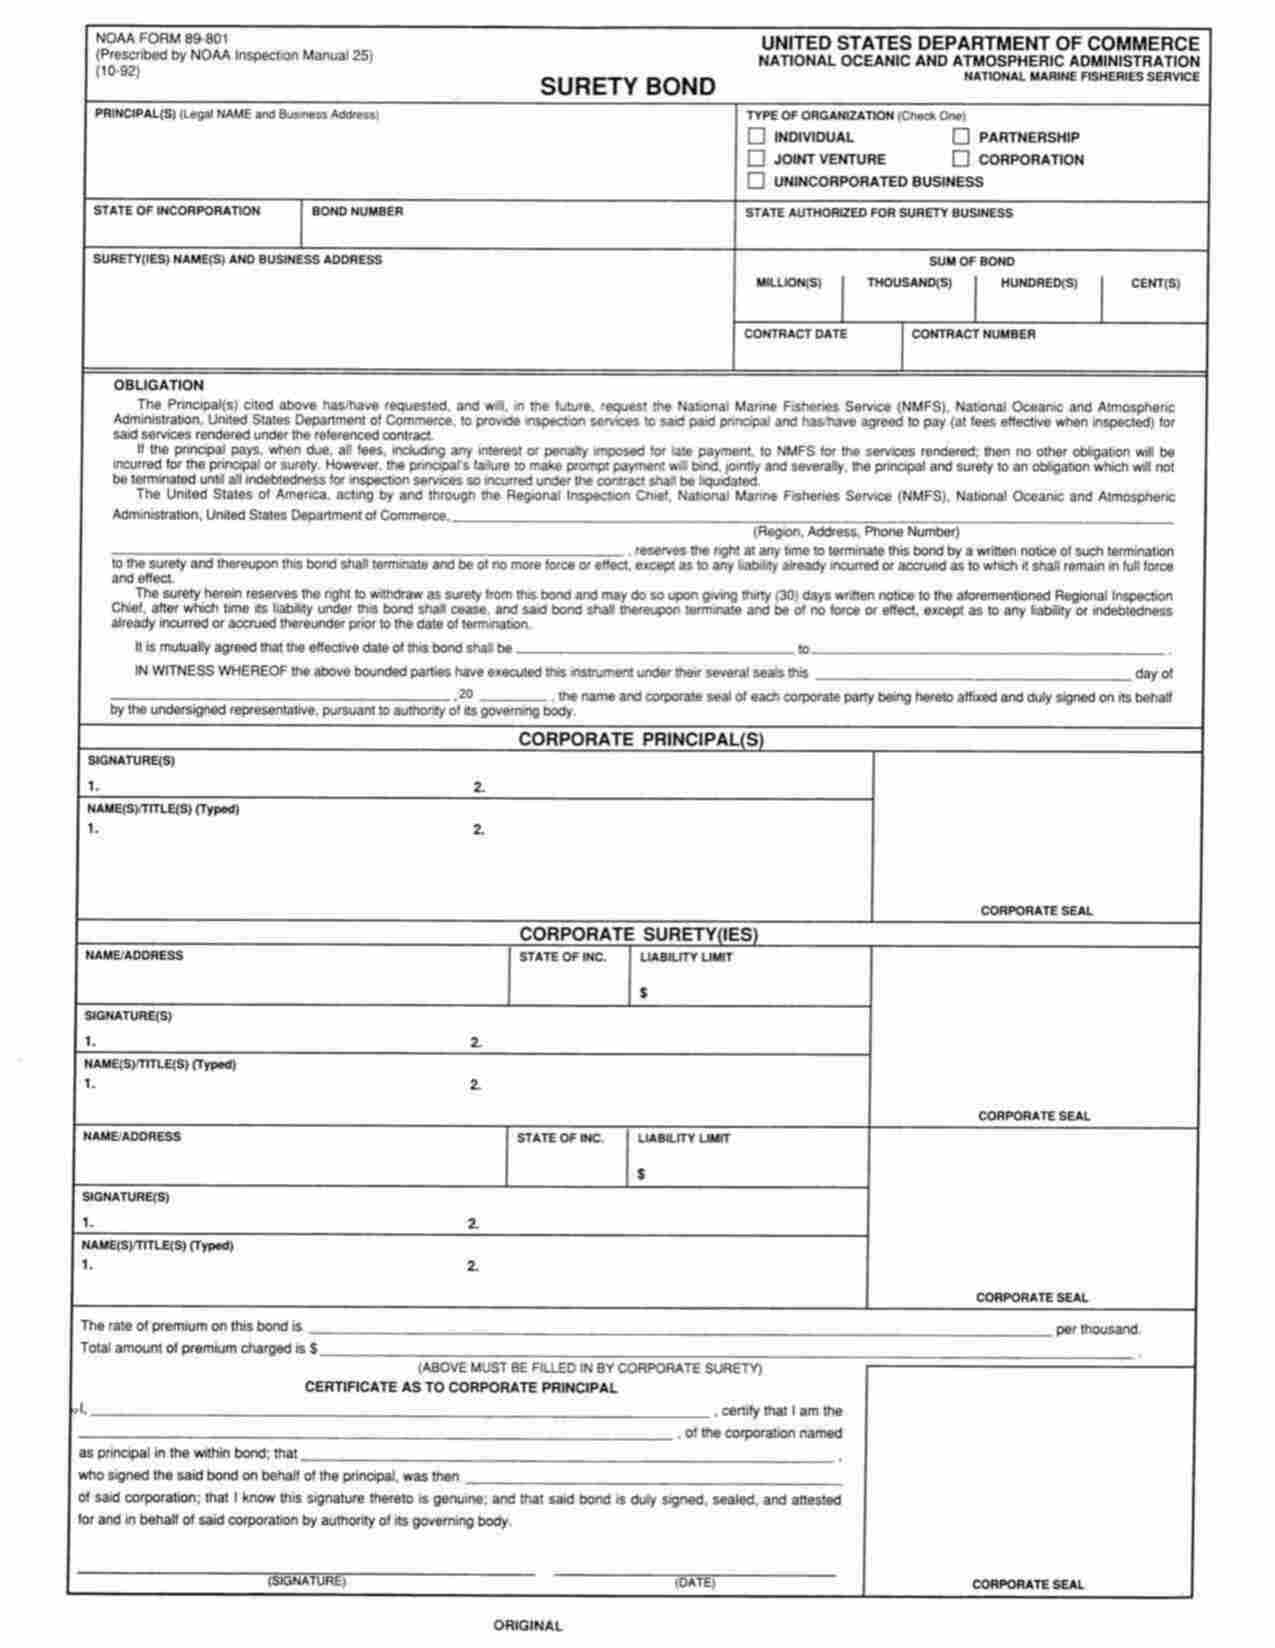 Federal Payment of Inspection Fees (NOAA Form 89-801) Bond Form